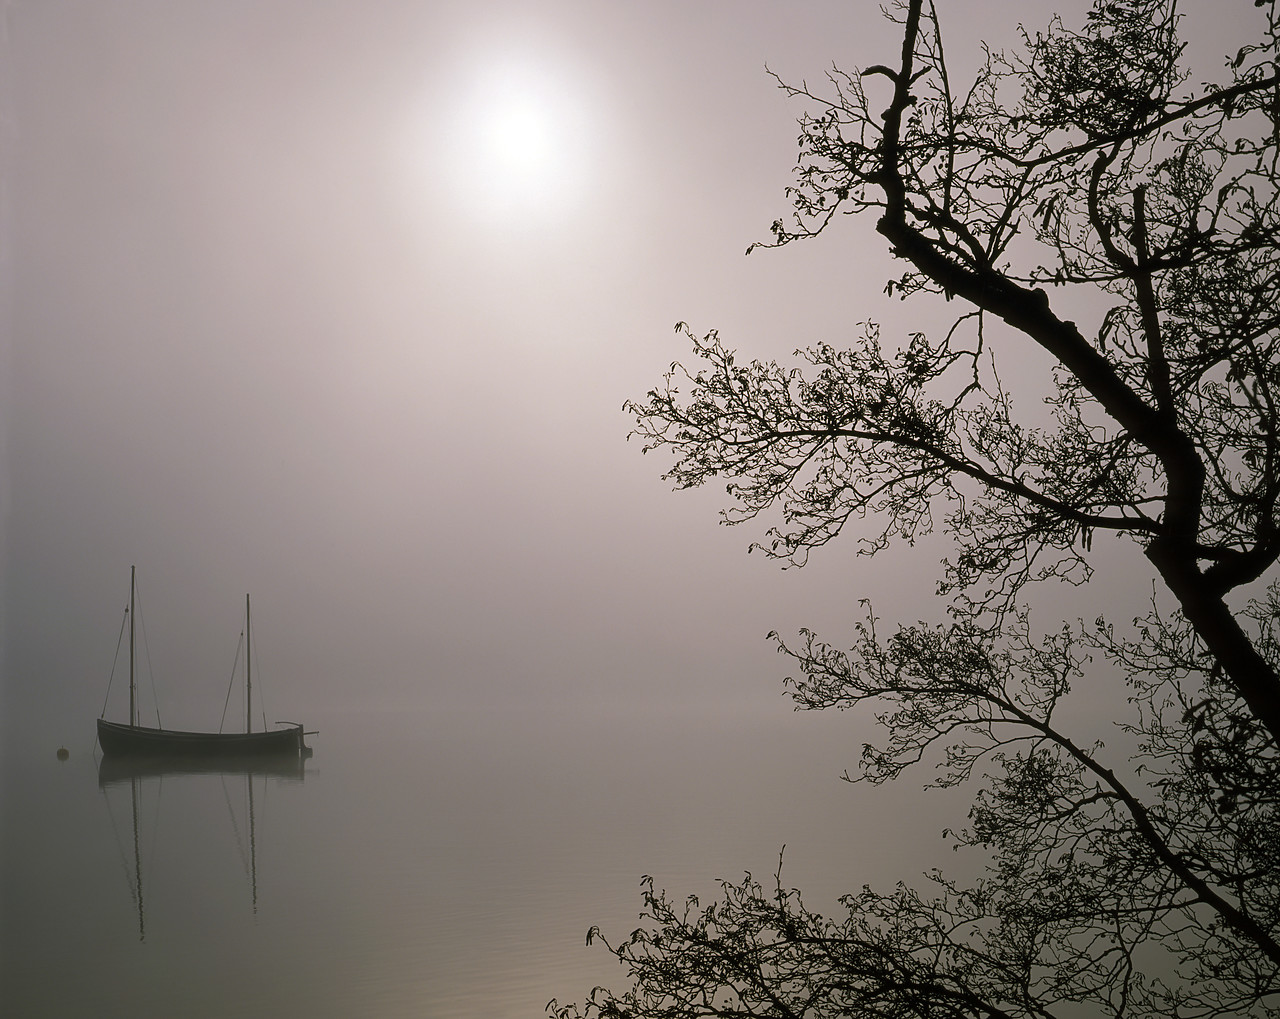 #923906-1 - Lone Boat in Mist, Ullswater, Lake District National Park, Cumbria, England